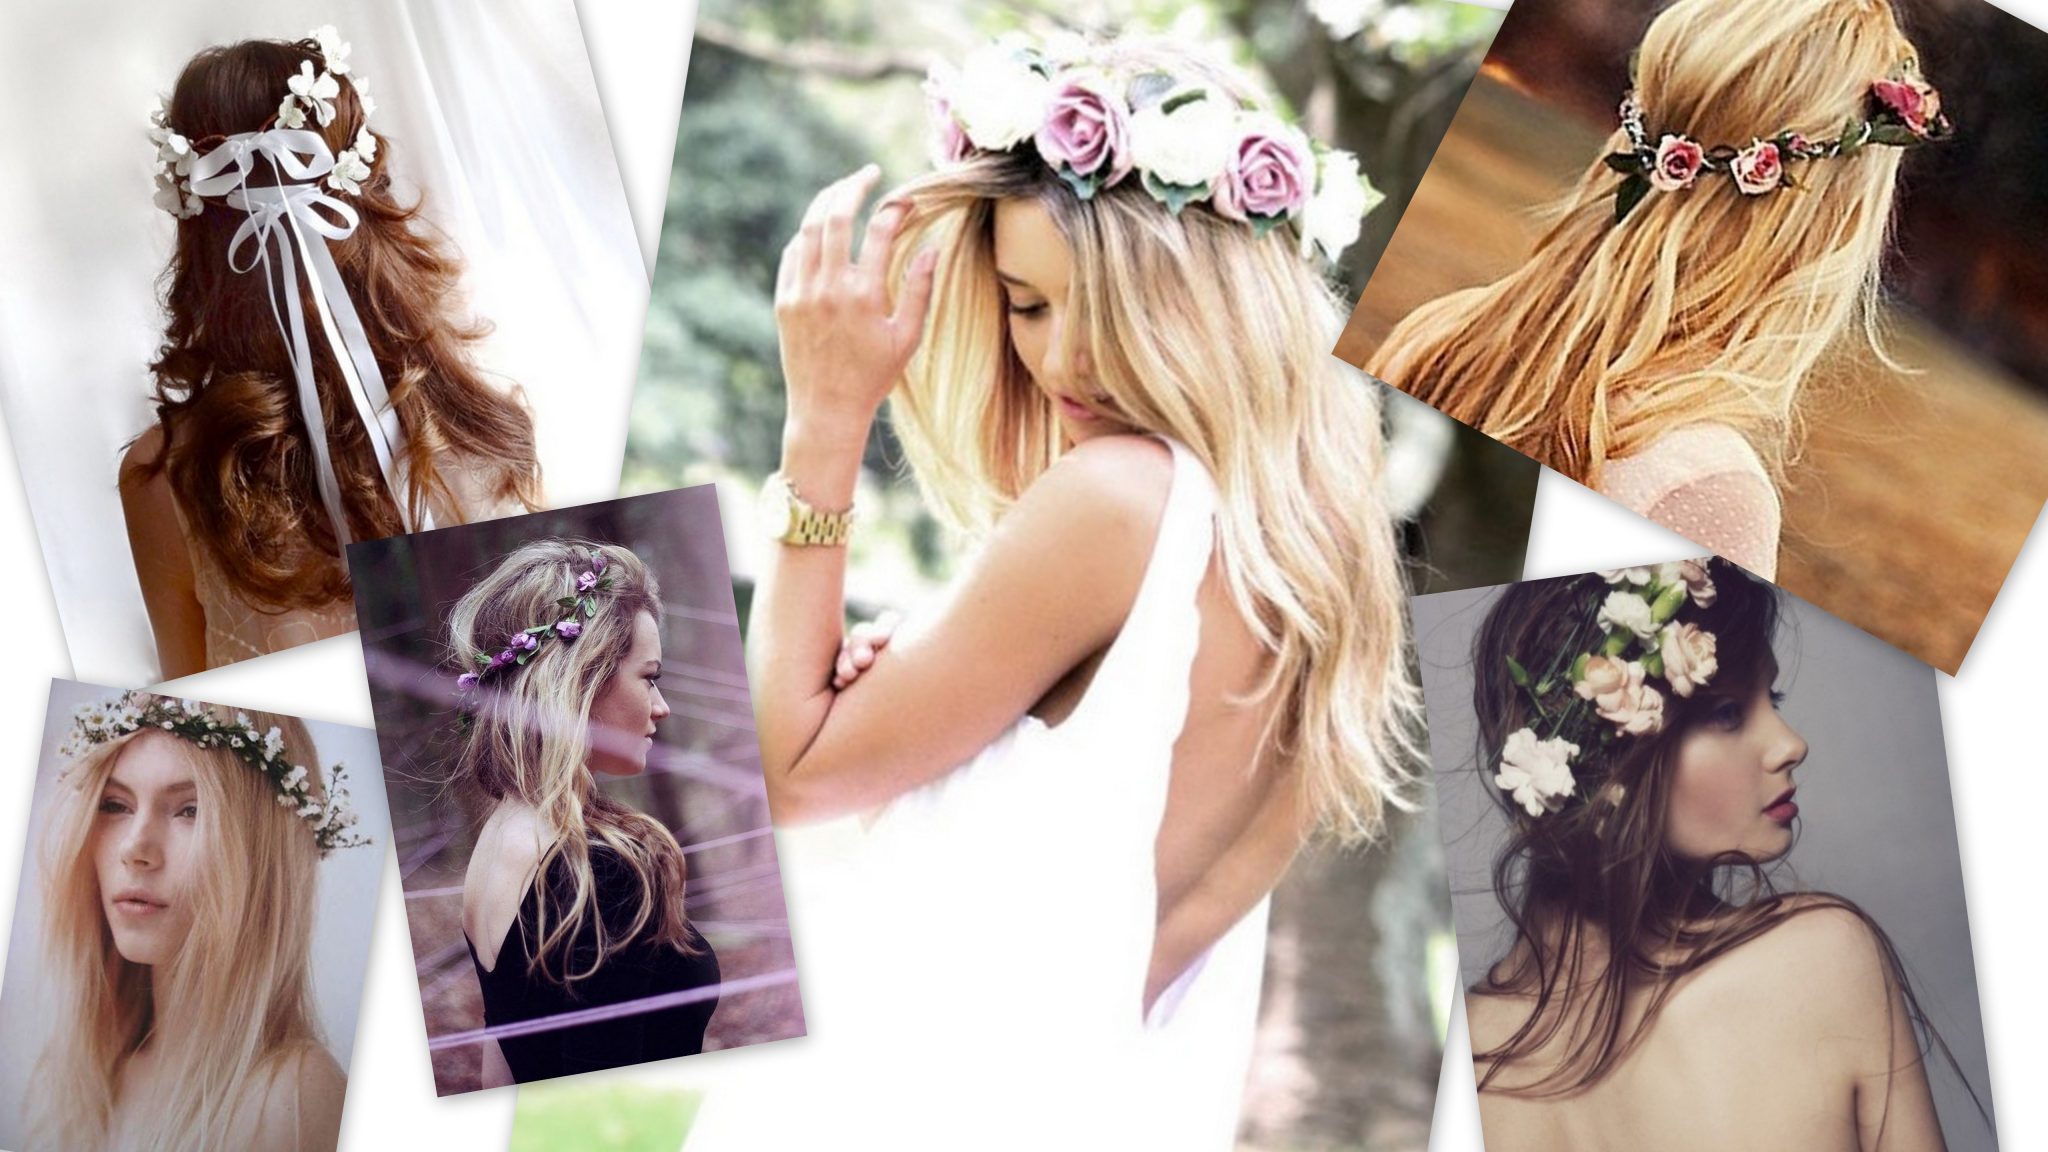 Summer Wedding? Try These Summer Wedding Hairstyles Inspired by Celebrities